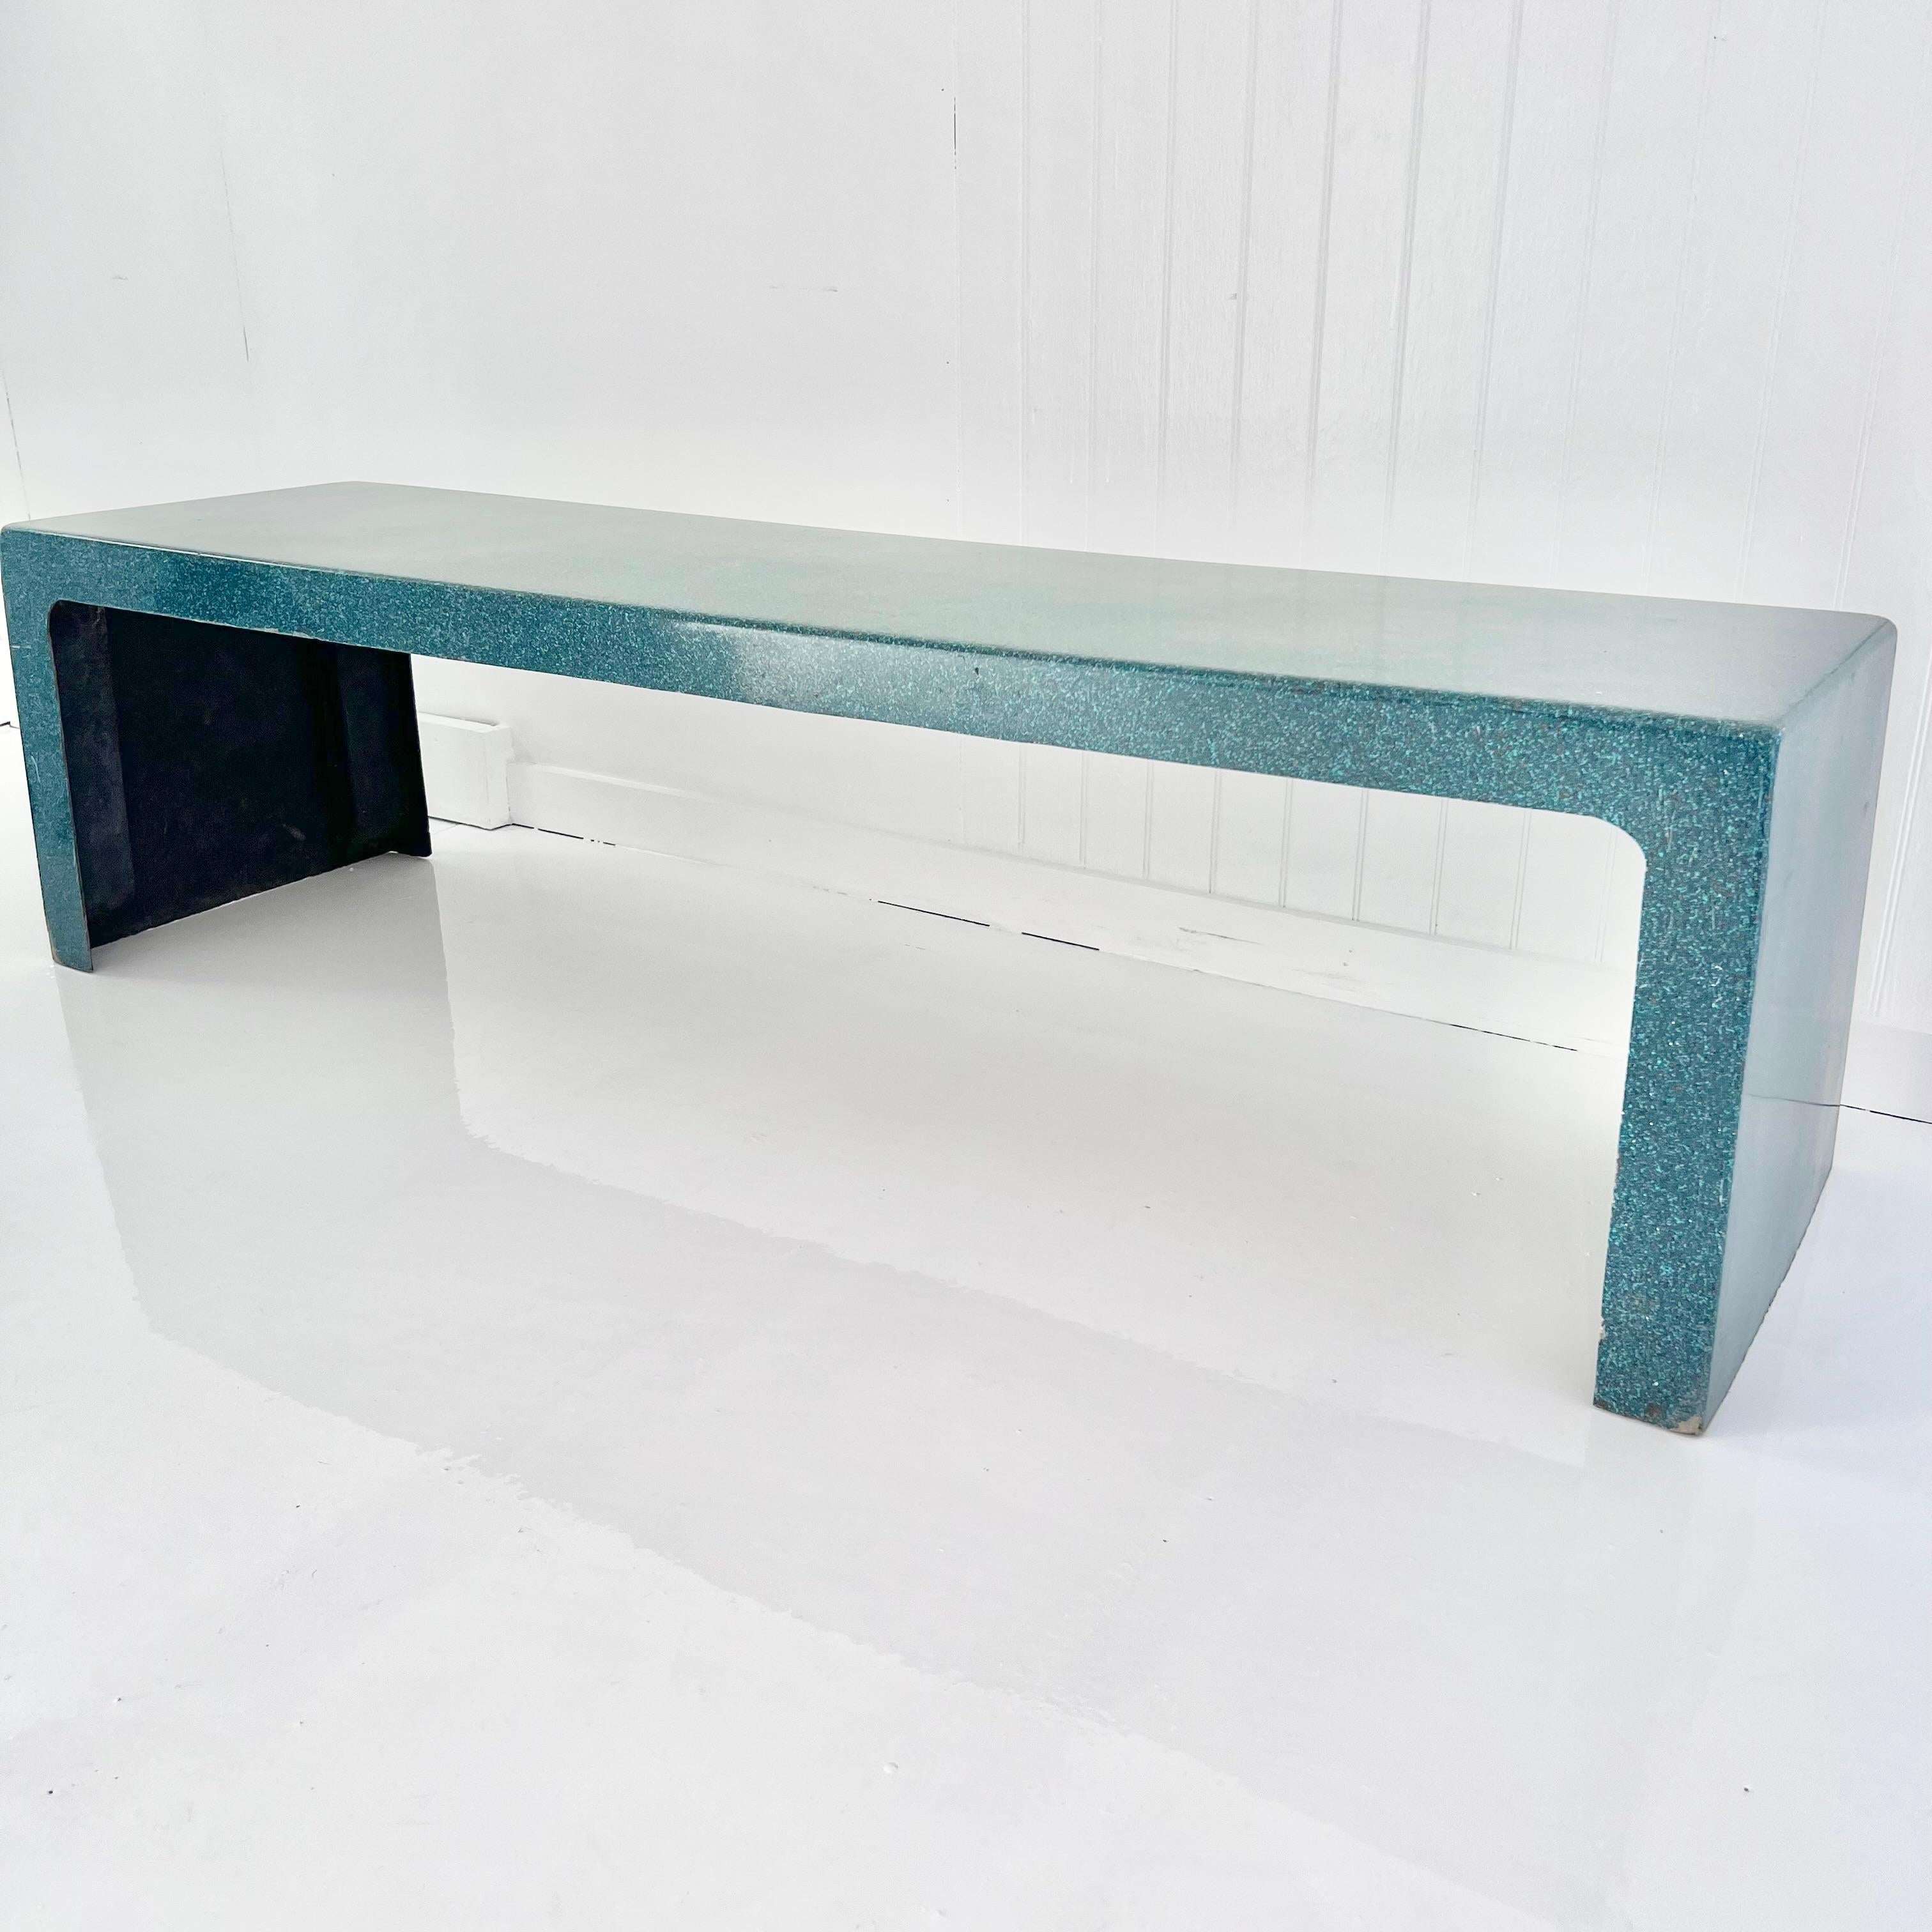 Beautiful sculptural fiberglass bench in a green sparkle finish. Simplistic design with very light wear. Single piece of fiberglass sculpted with great lines from all angles. Made for the outdoors but also looks great inside. Green shell with